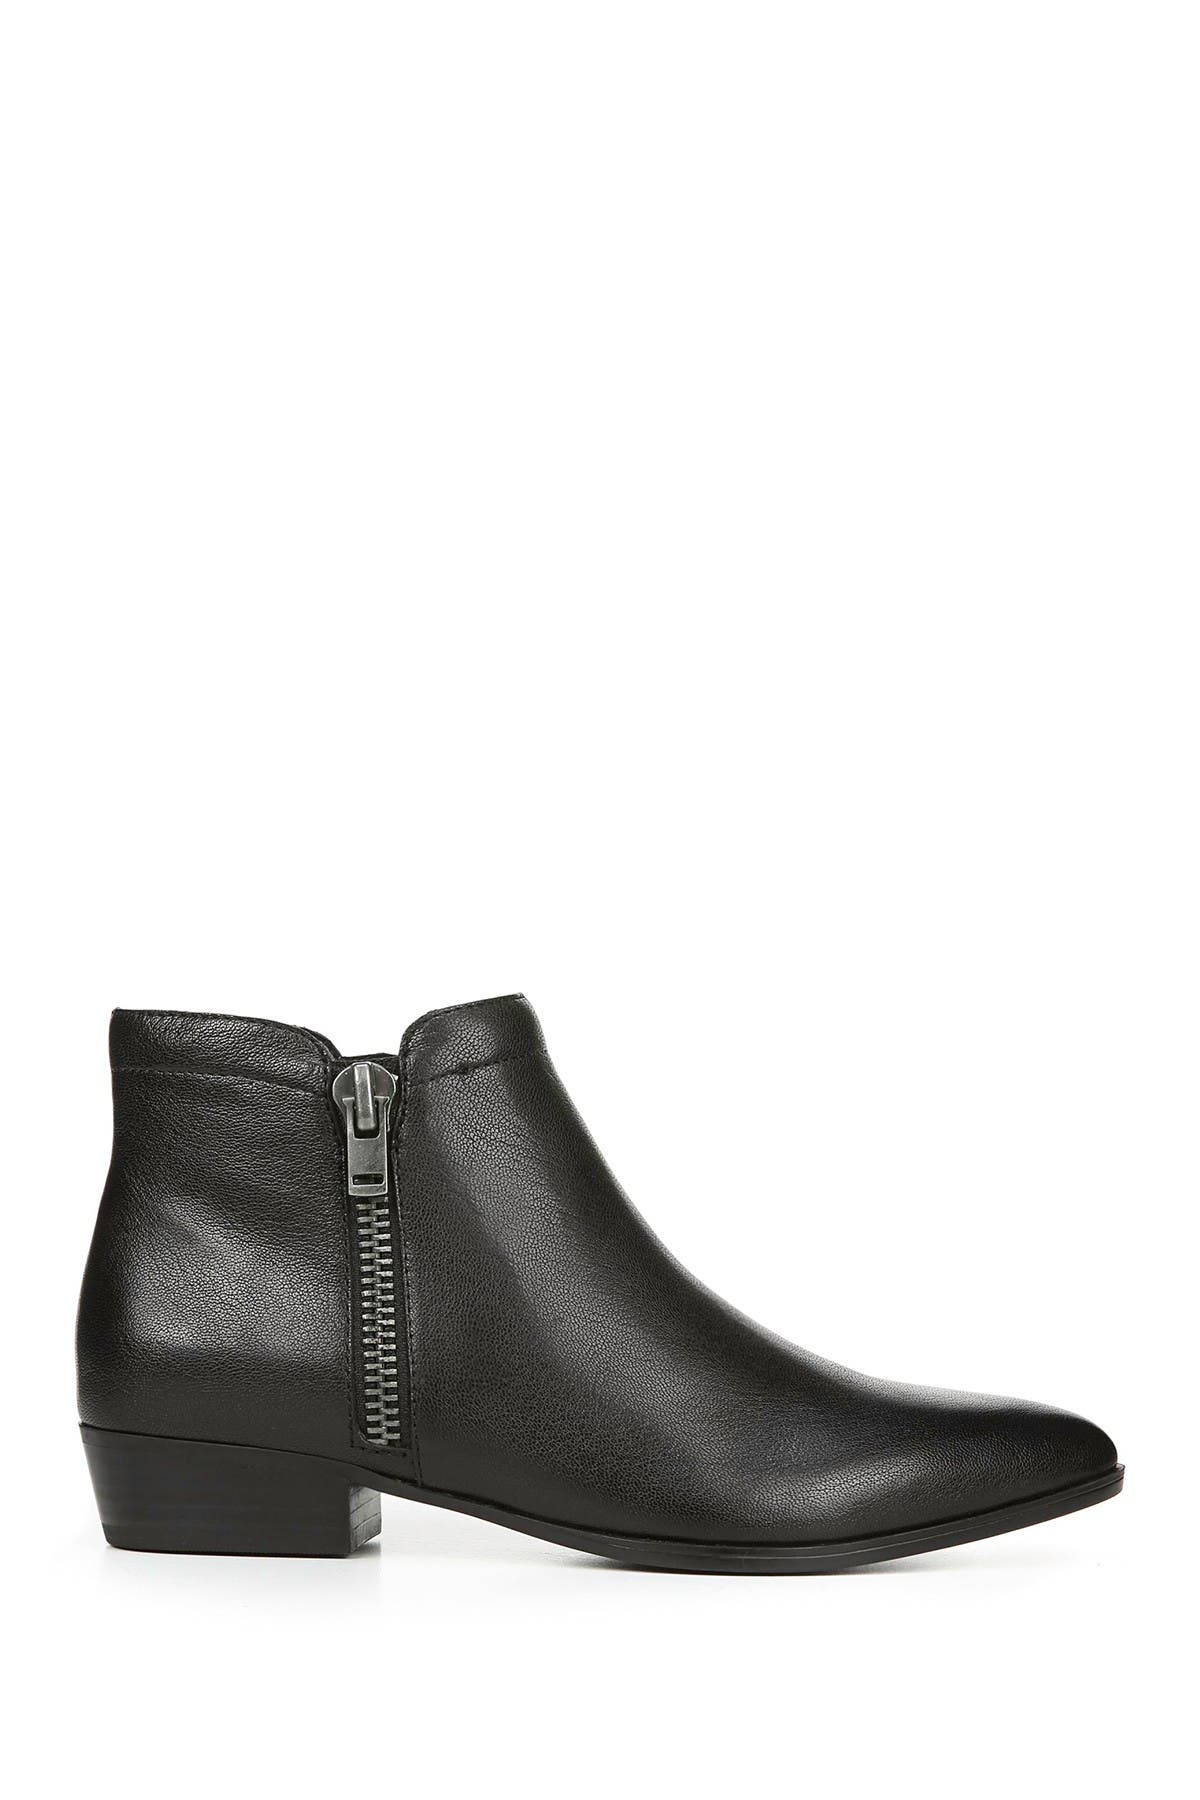 naturalizer ankle boots wide width